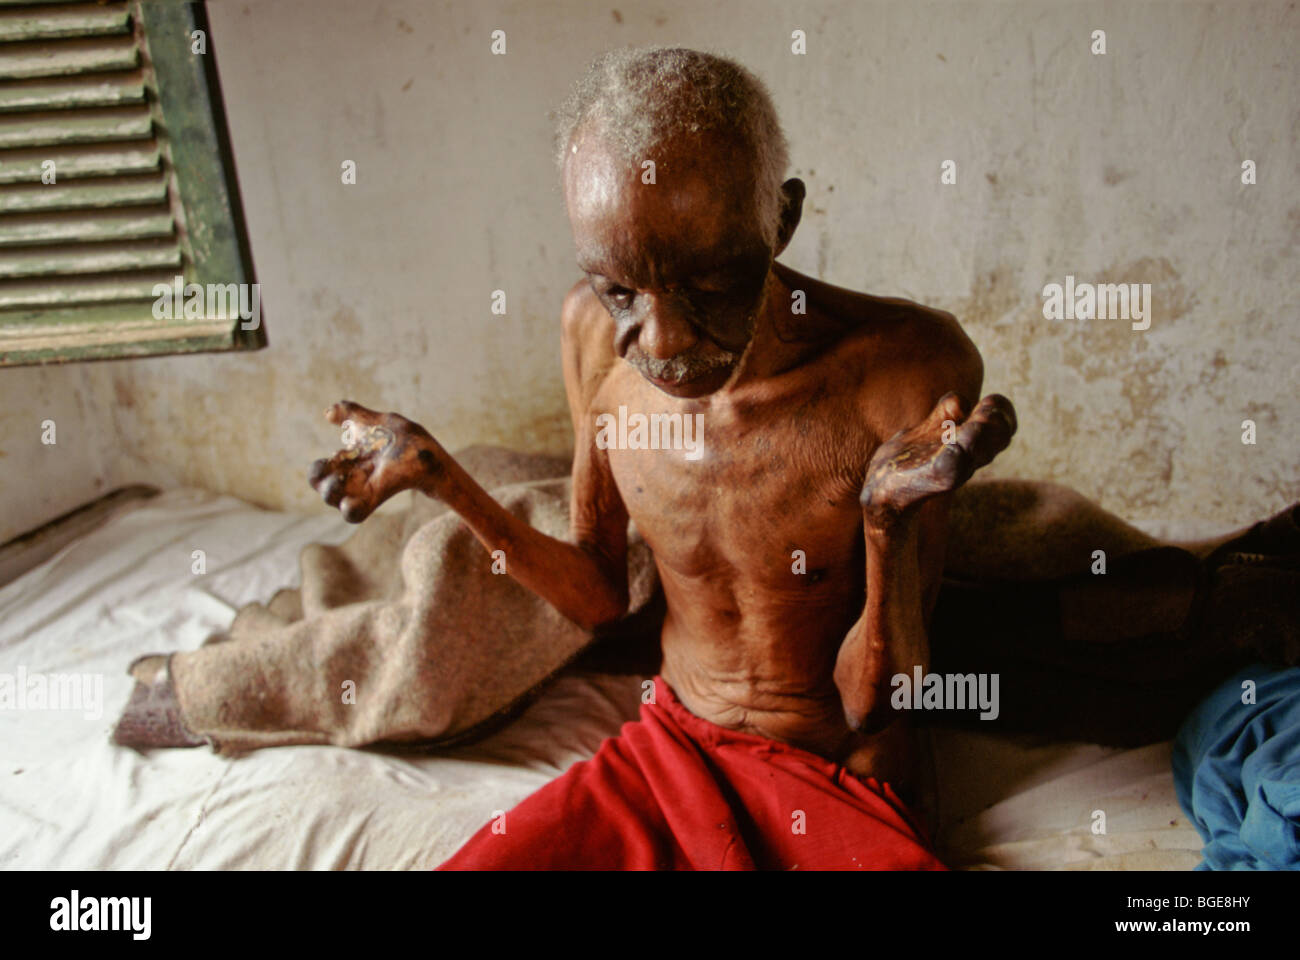 A resident in a leper colony, Luanda, Angola.  He has already lost his fingers. Stock Photo